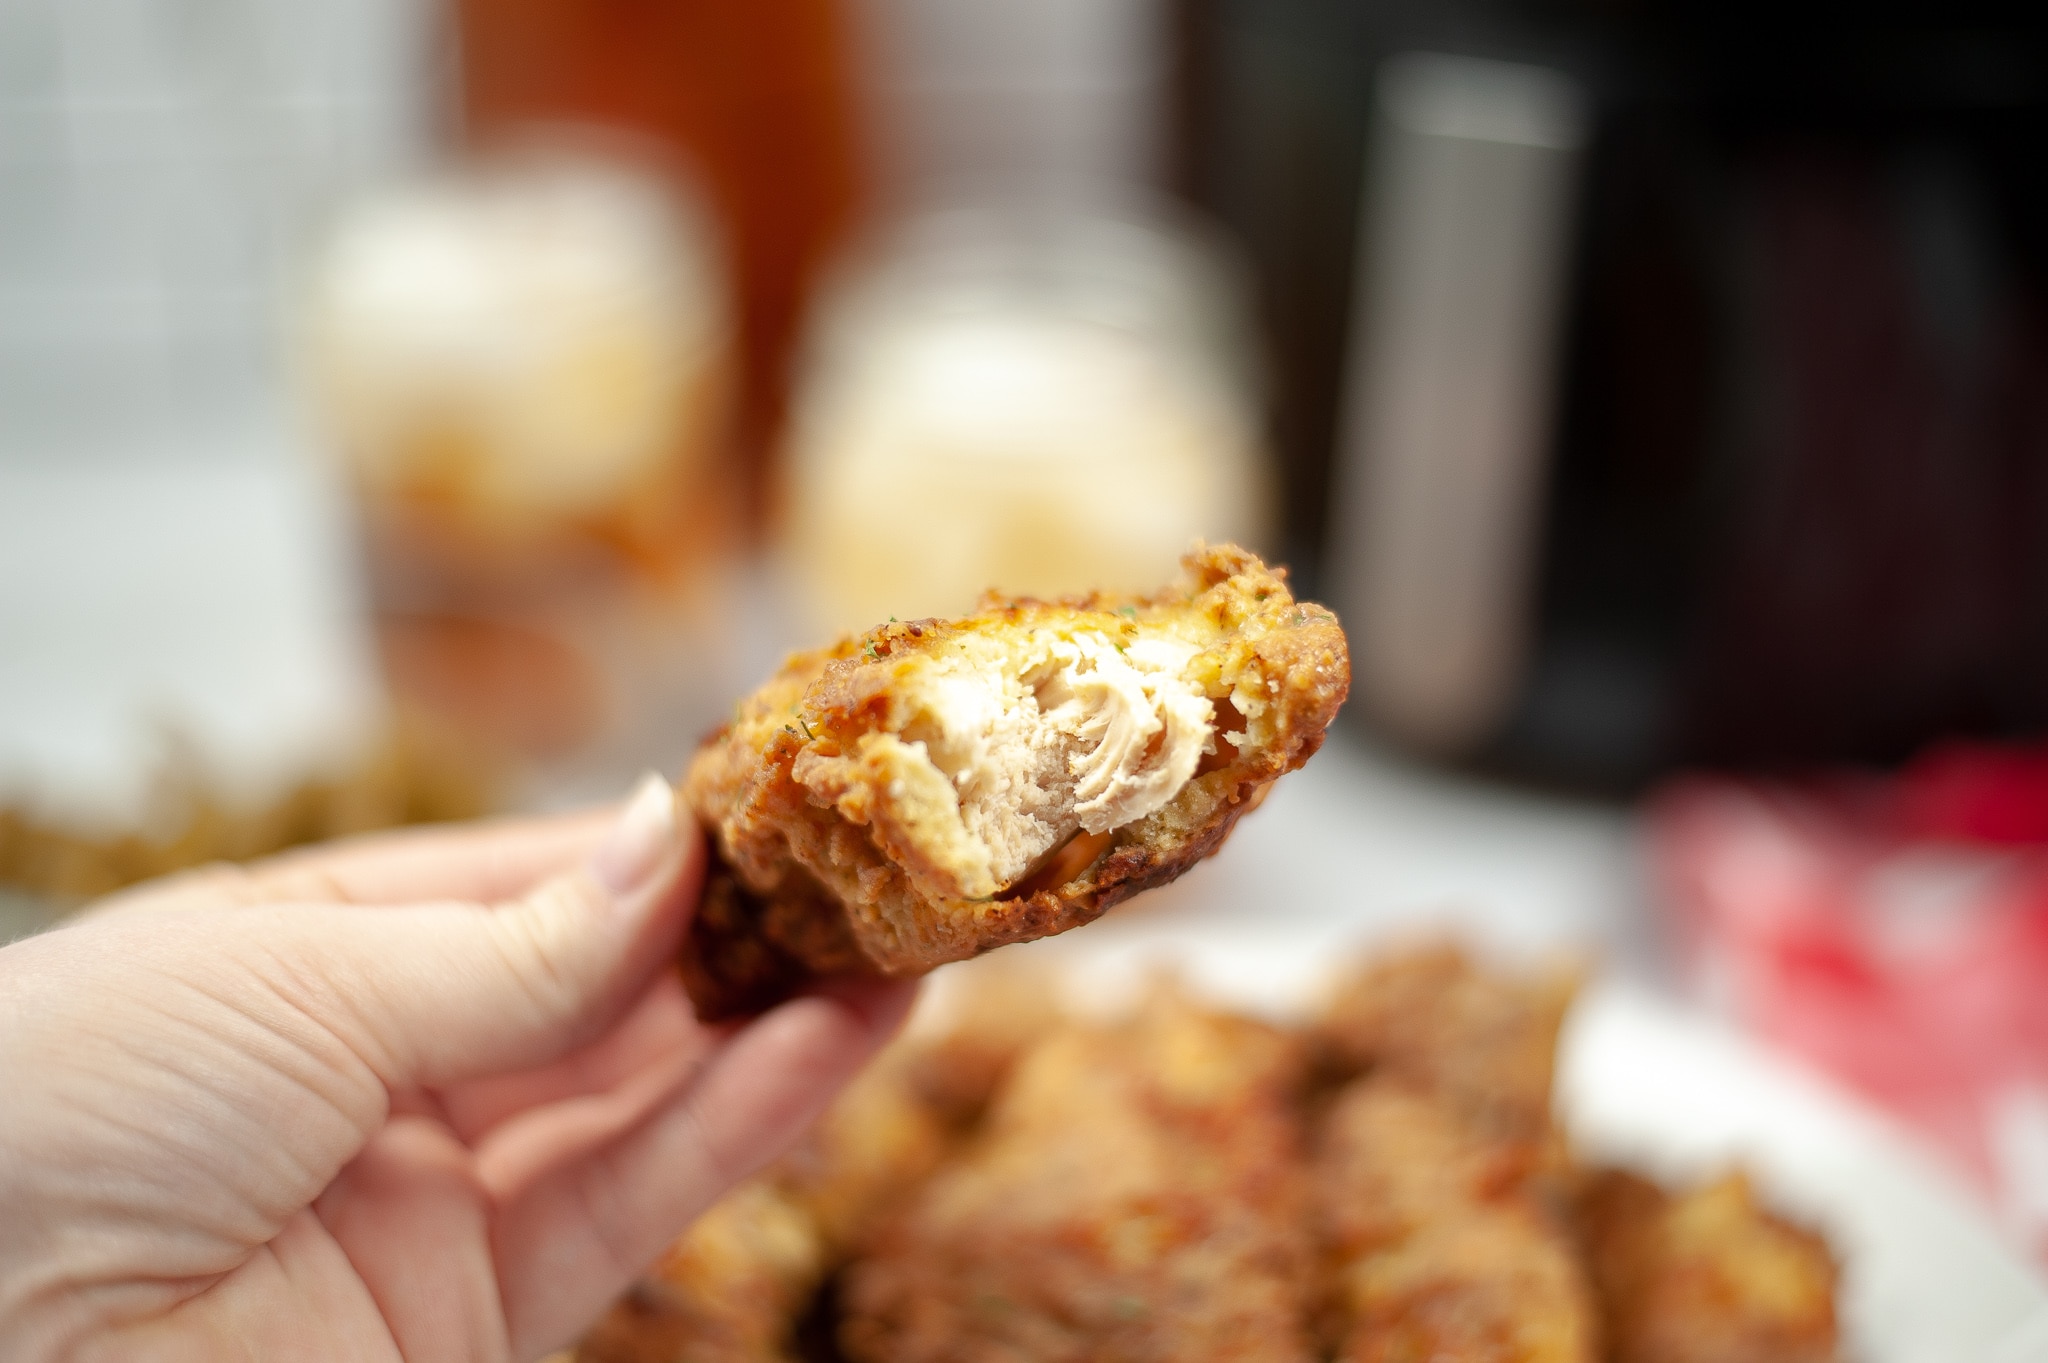 close up of a hand holding an Air Fryer Chicken Tender with a bite taken out of it, with a plate of Air Fryer Chicken Tenders blurred in the background